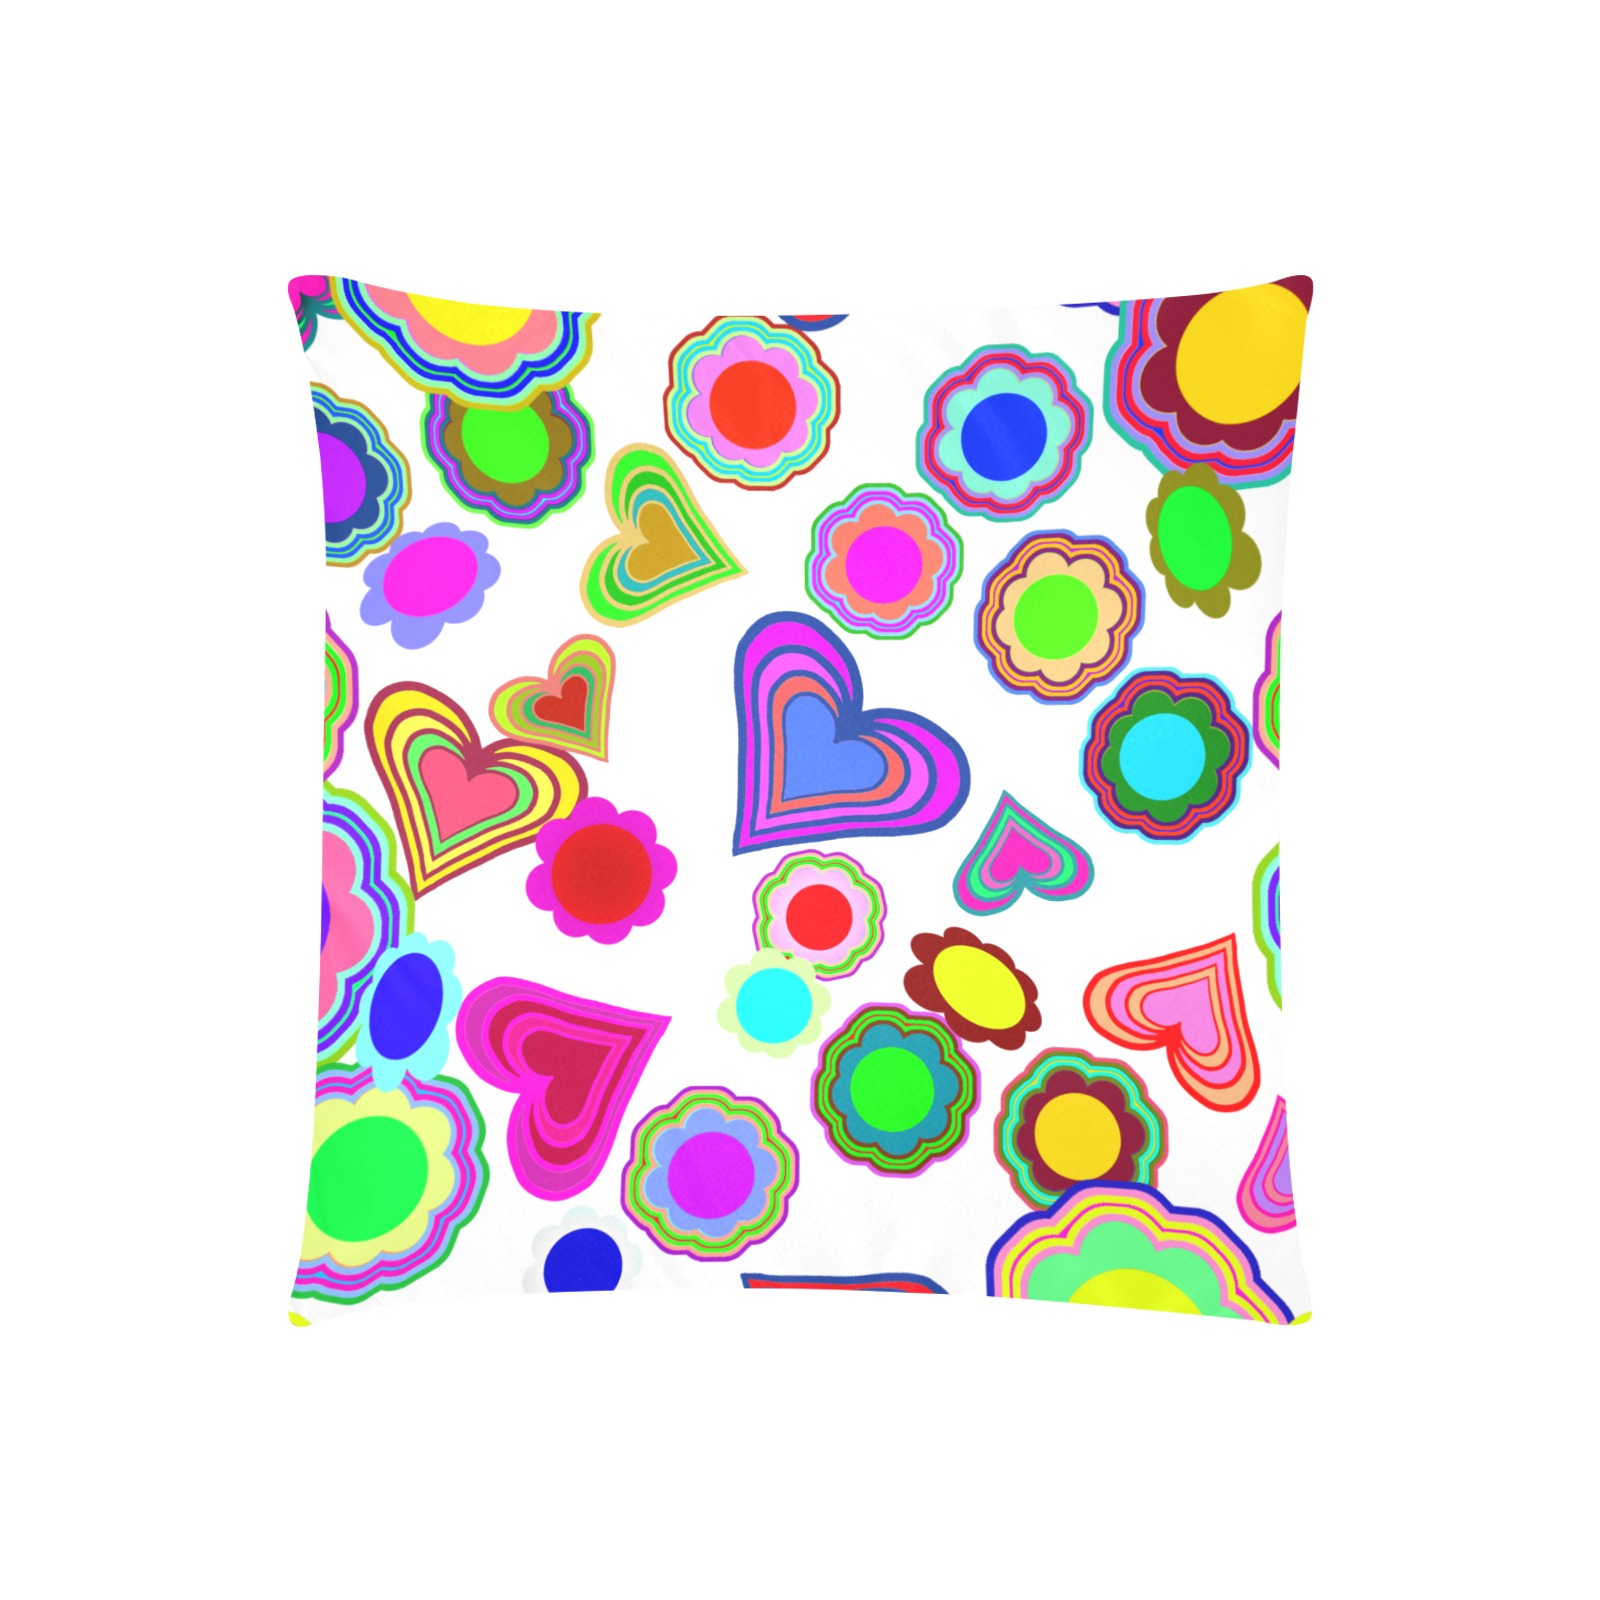 Groovy Hearts Flowers Pattern White Custom Zippered Pillow Cases 20"x20" (Two Sides)